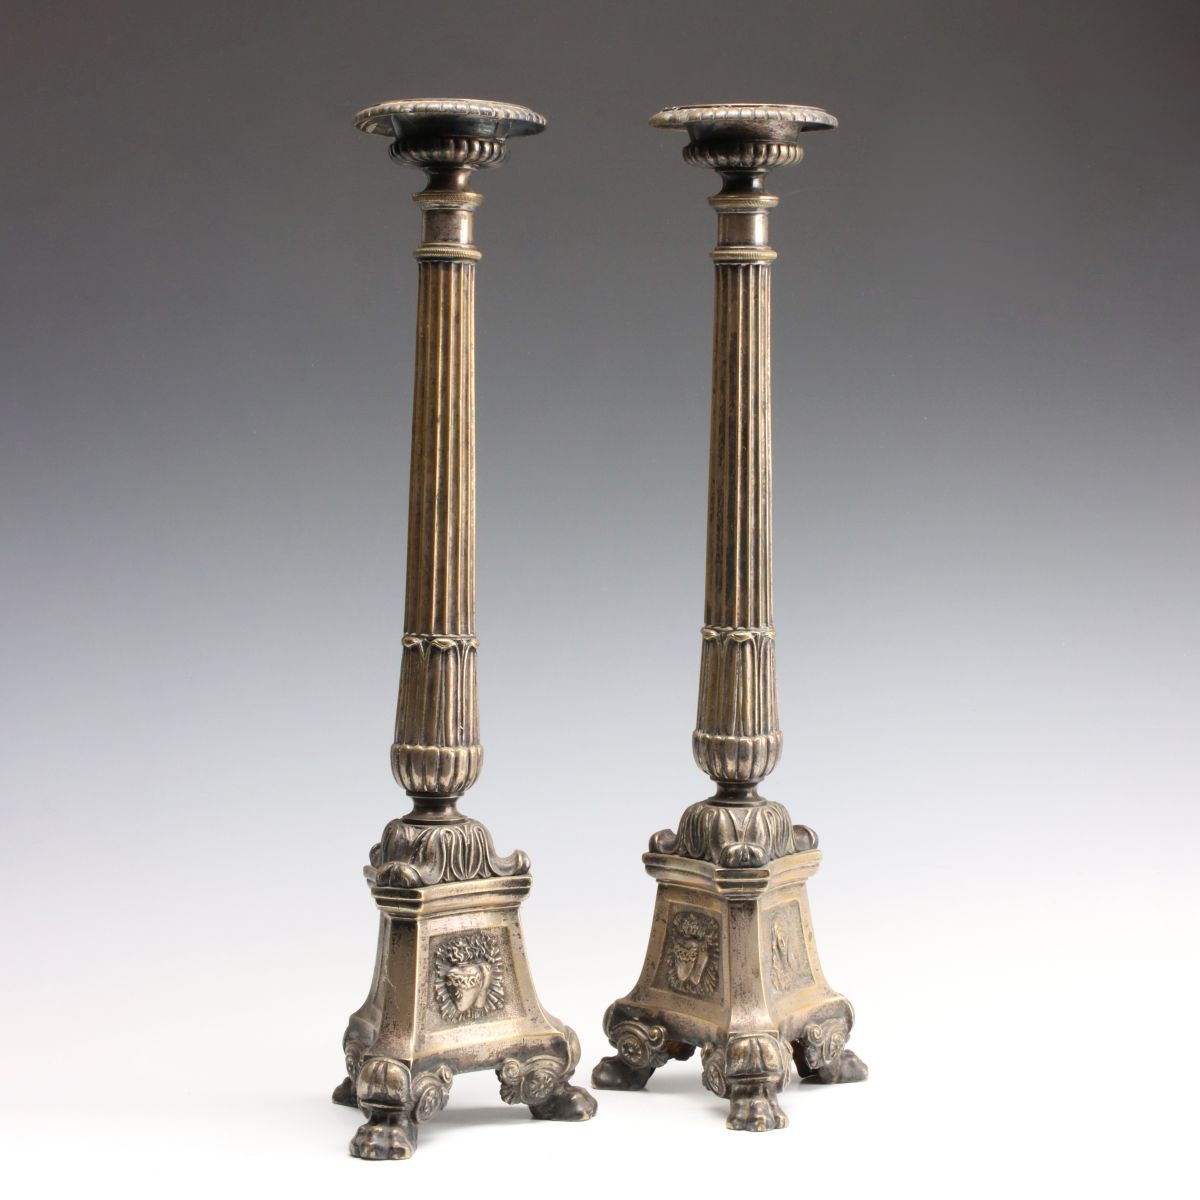 A PAIR EARLY 19TH C. FRENCH BRONZE ALTAR STICKS